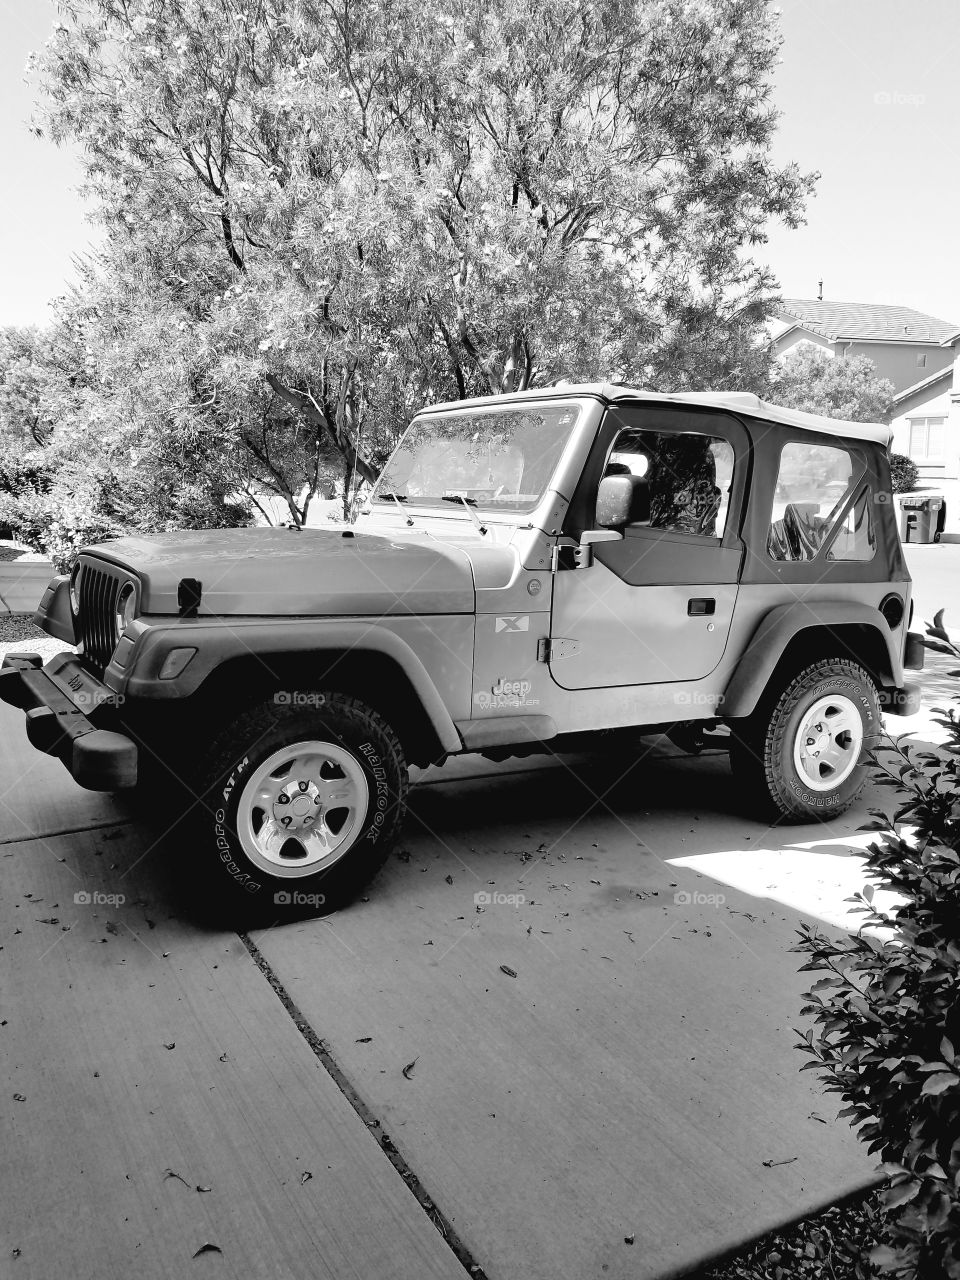 Jeep in the Driveway